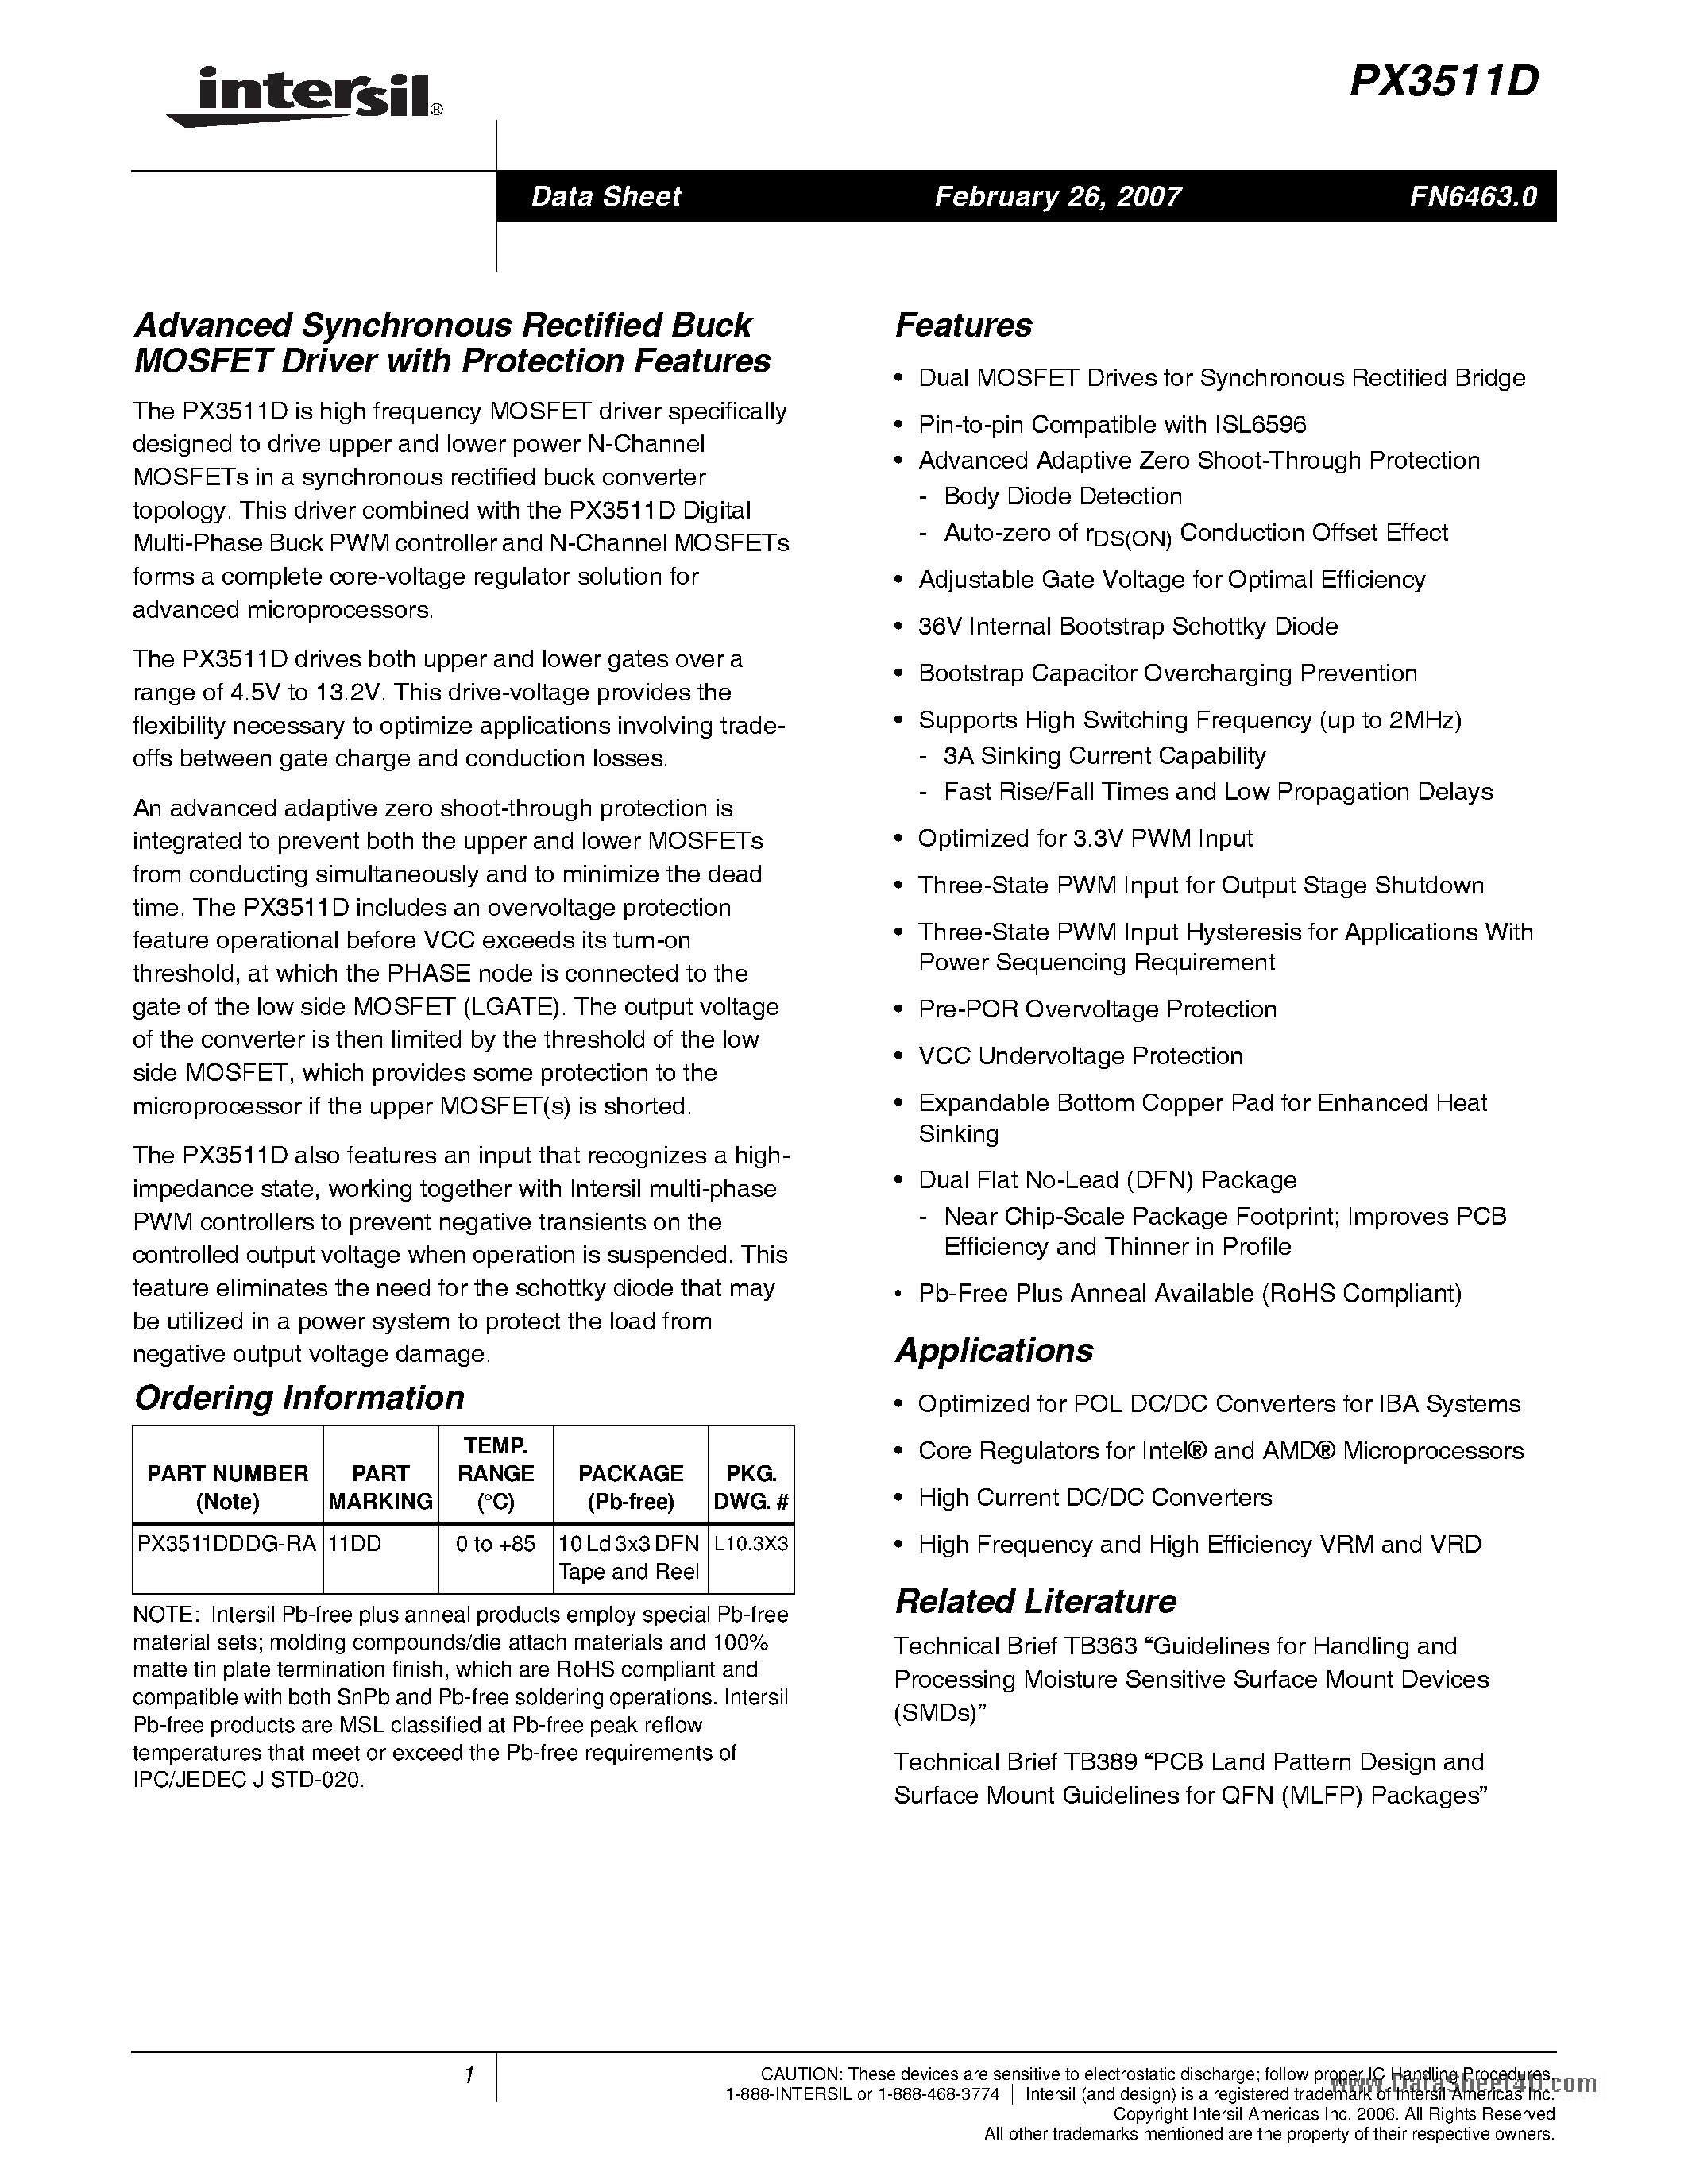 Datasheet PX3511D - Advanced Synchronous Rectified Buck MOSFET Driver page 1